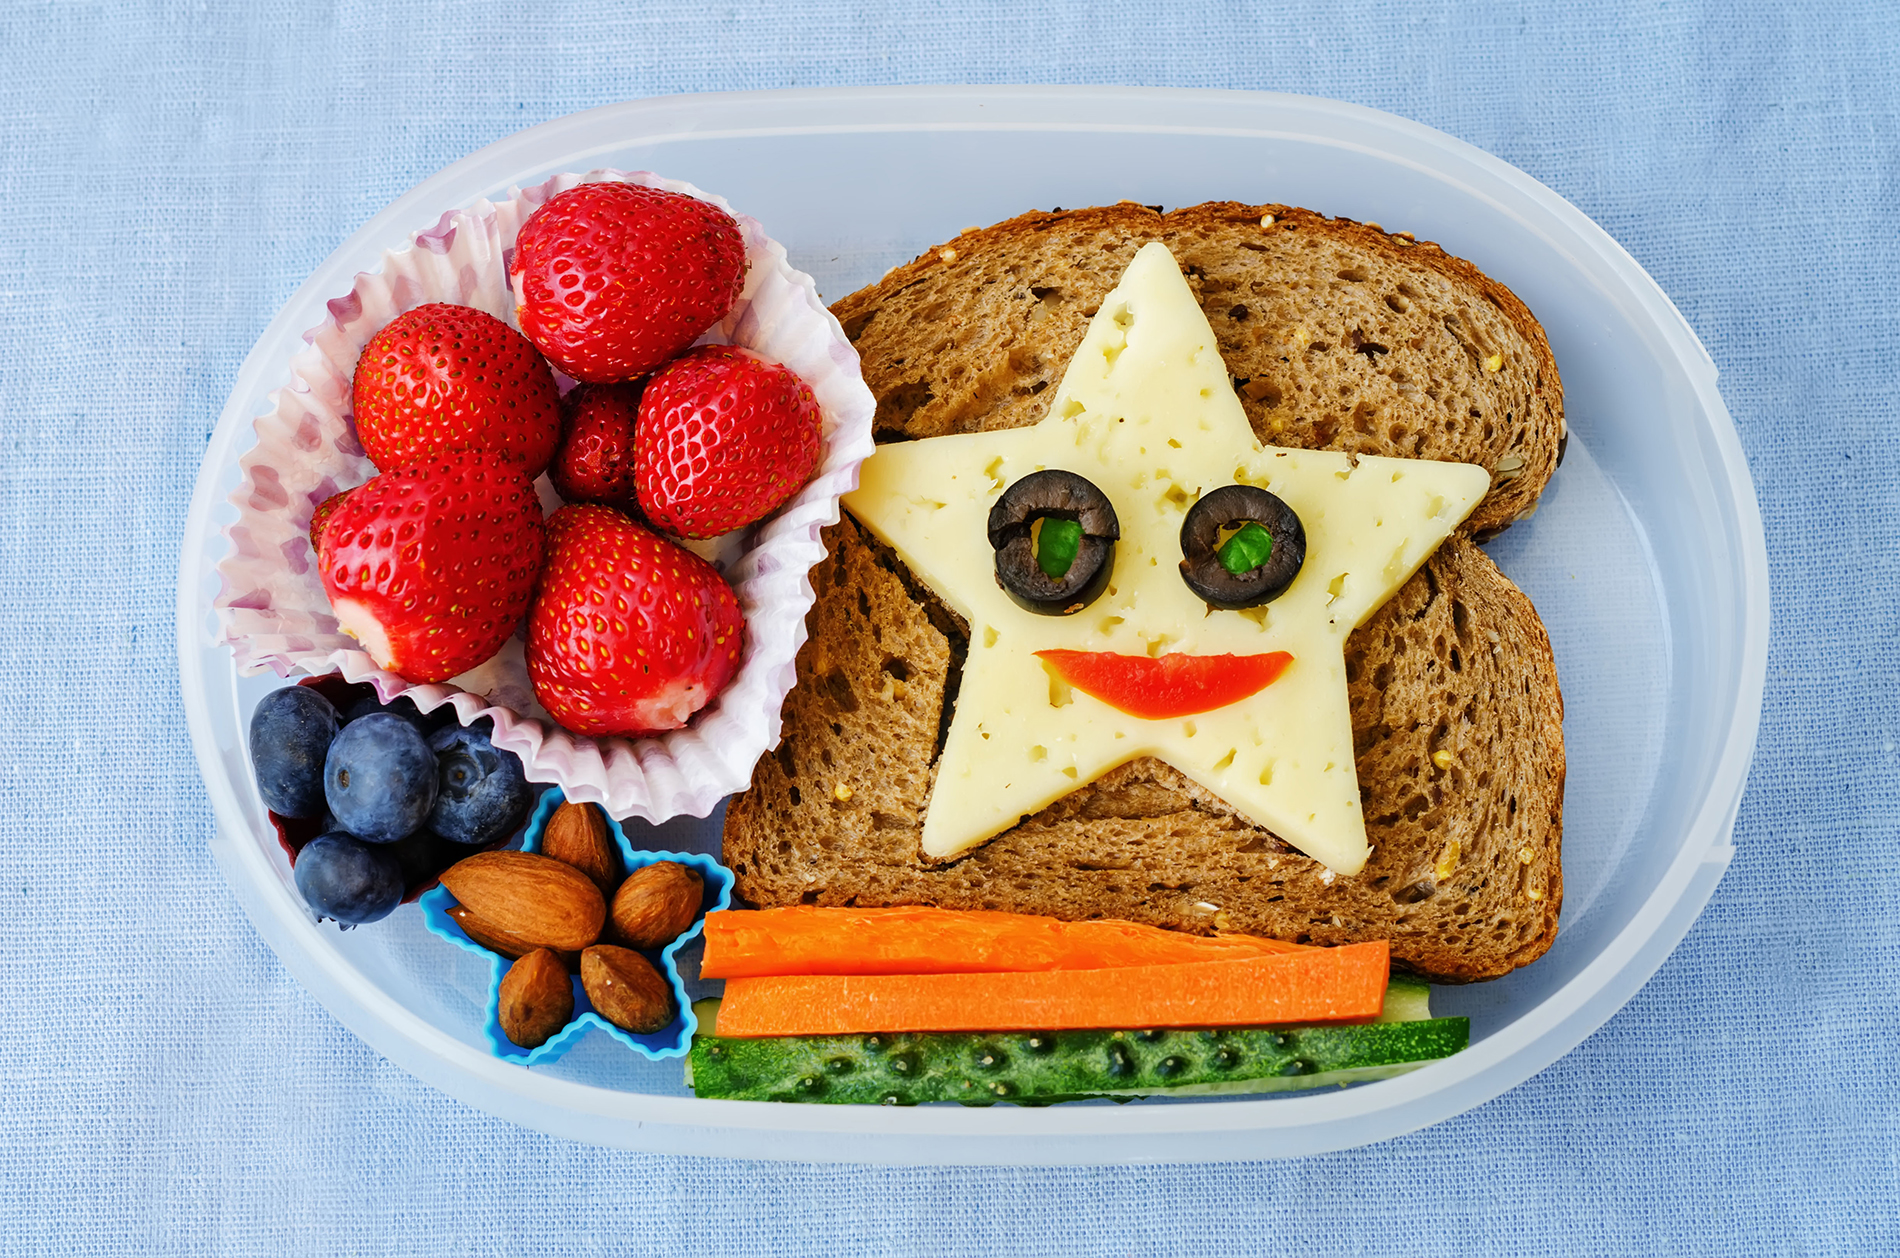 Whole wheat sandwich, cheese , fruit and vegetables in lunch box